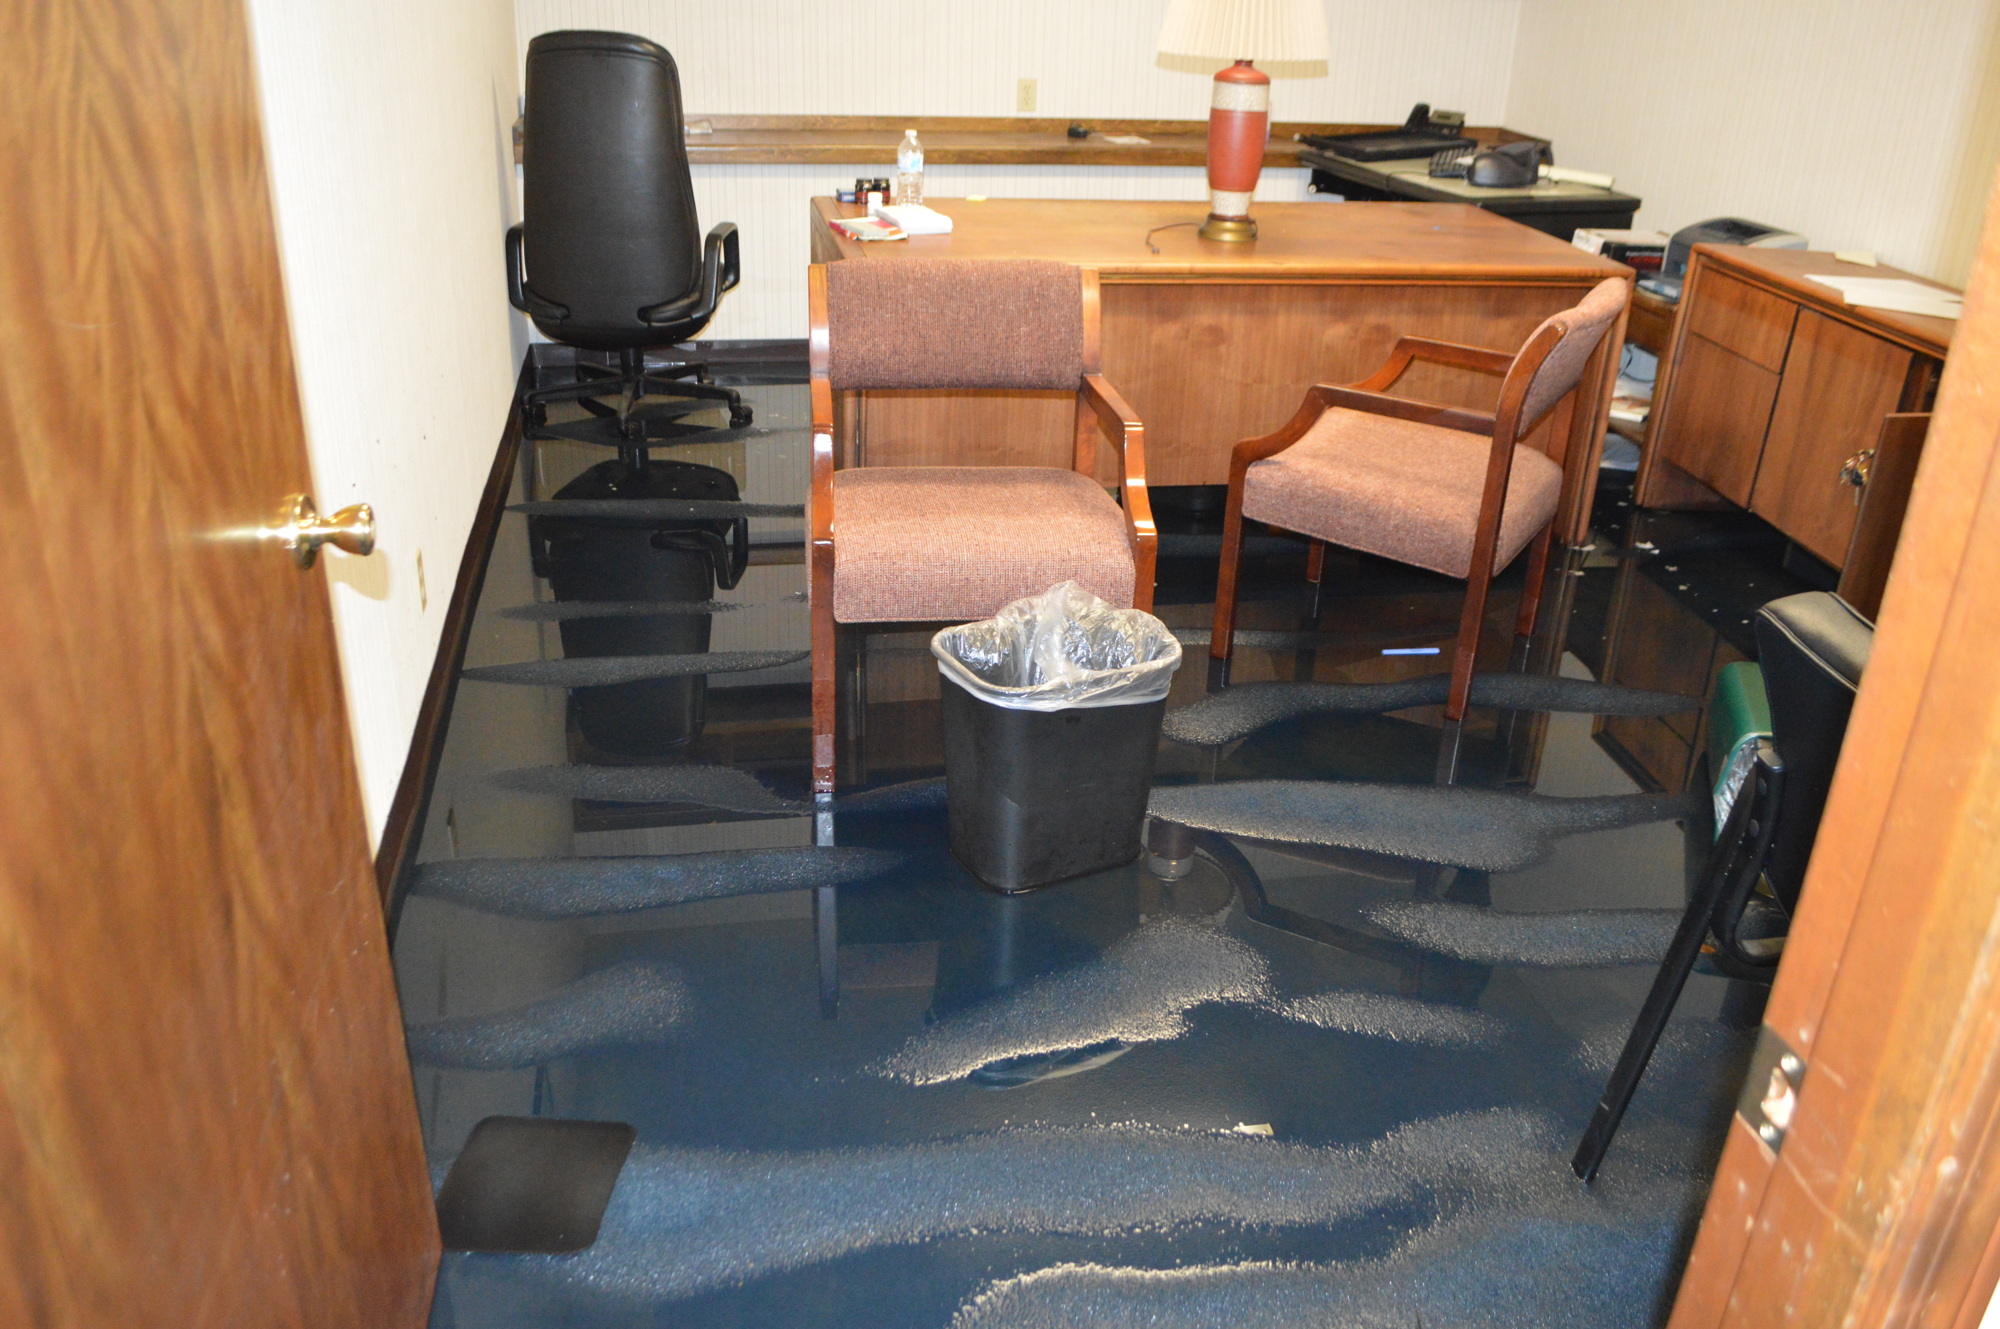 First Coast Mediation and Arbitration’s East Bay Street office received at least two feet of flooding during Hurricane Irma. Floors were soaked Tuesday.   (Photo by David Cawton)